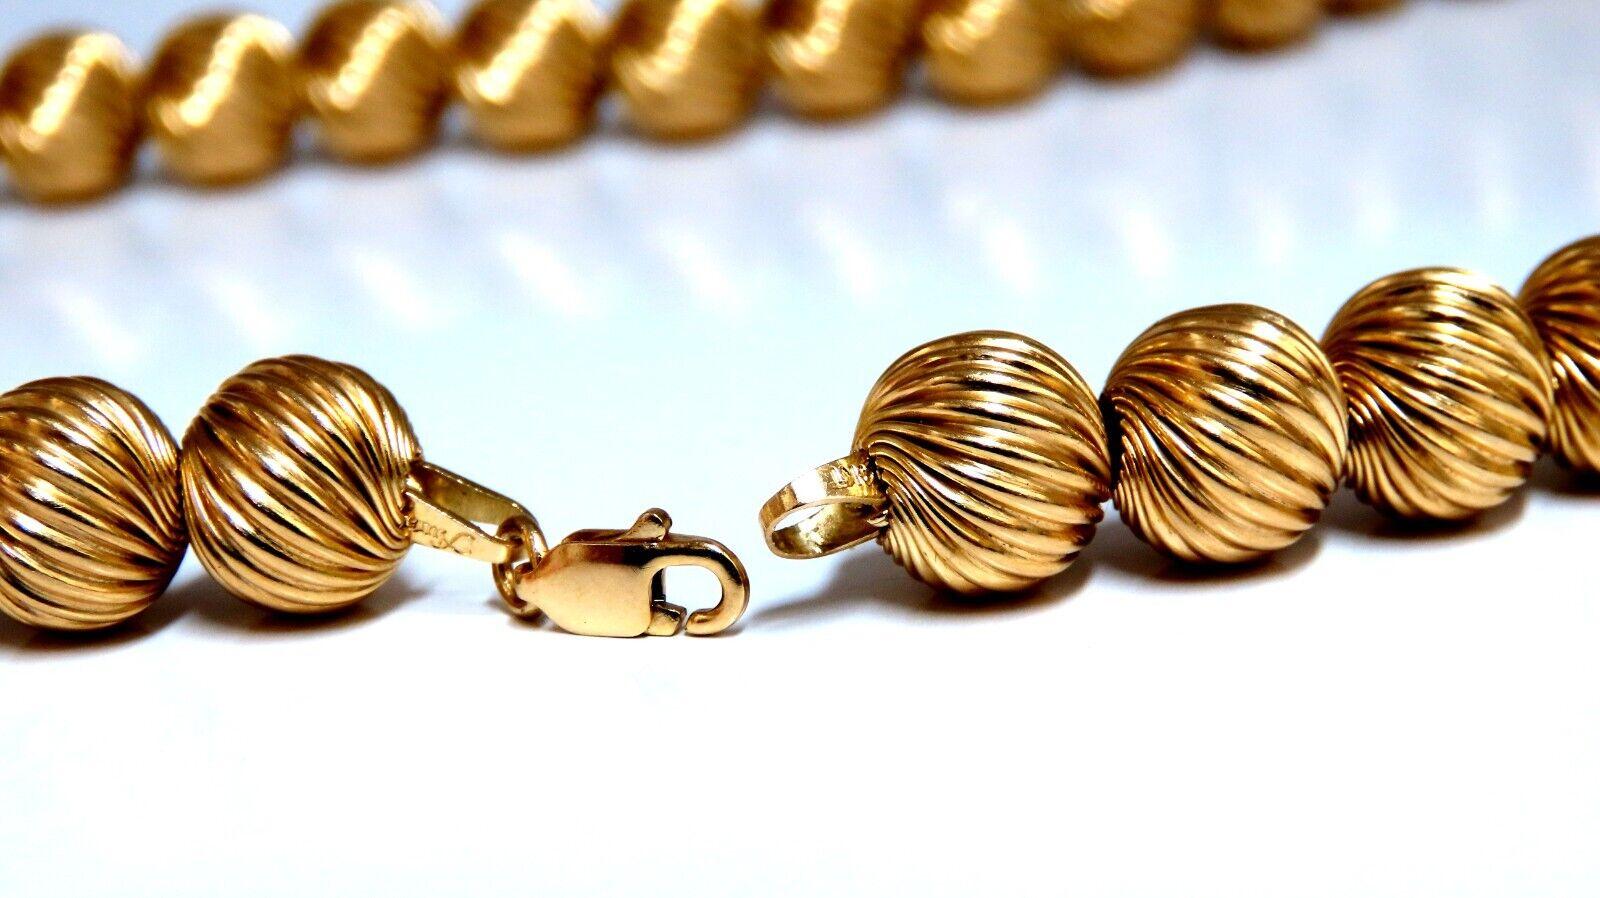 Deco link necklace

14Kt Yellow Gold

Weight: 40 Grams

17.5 inches length.

Comfortable clasp